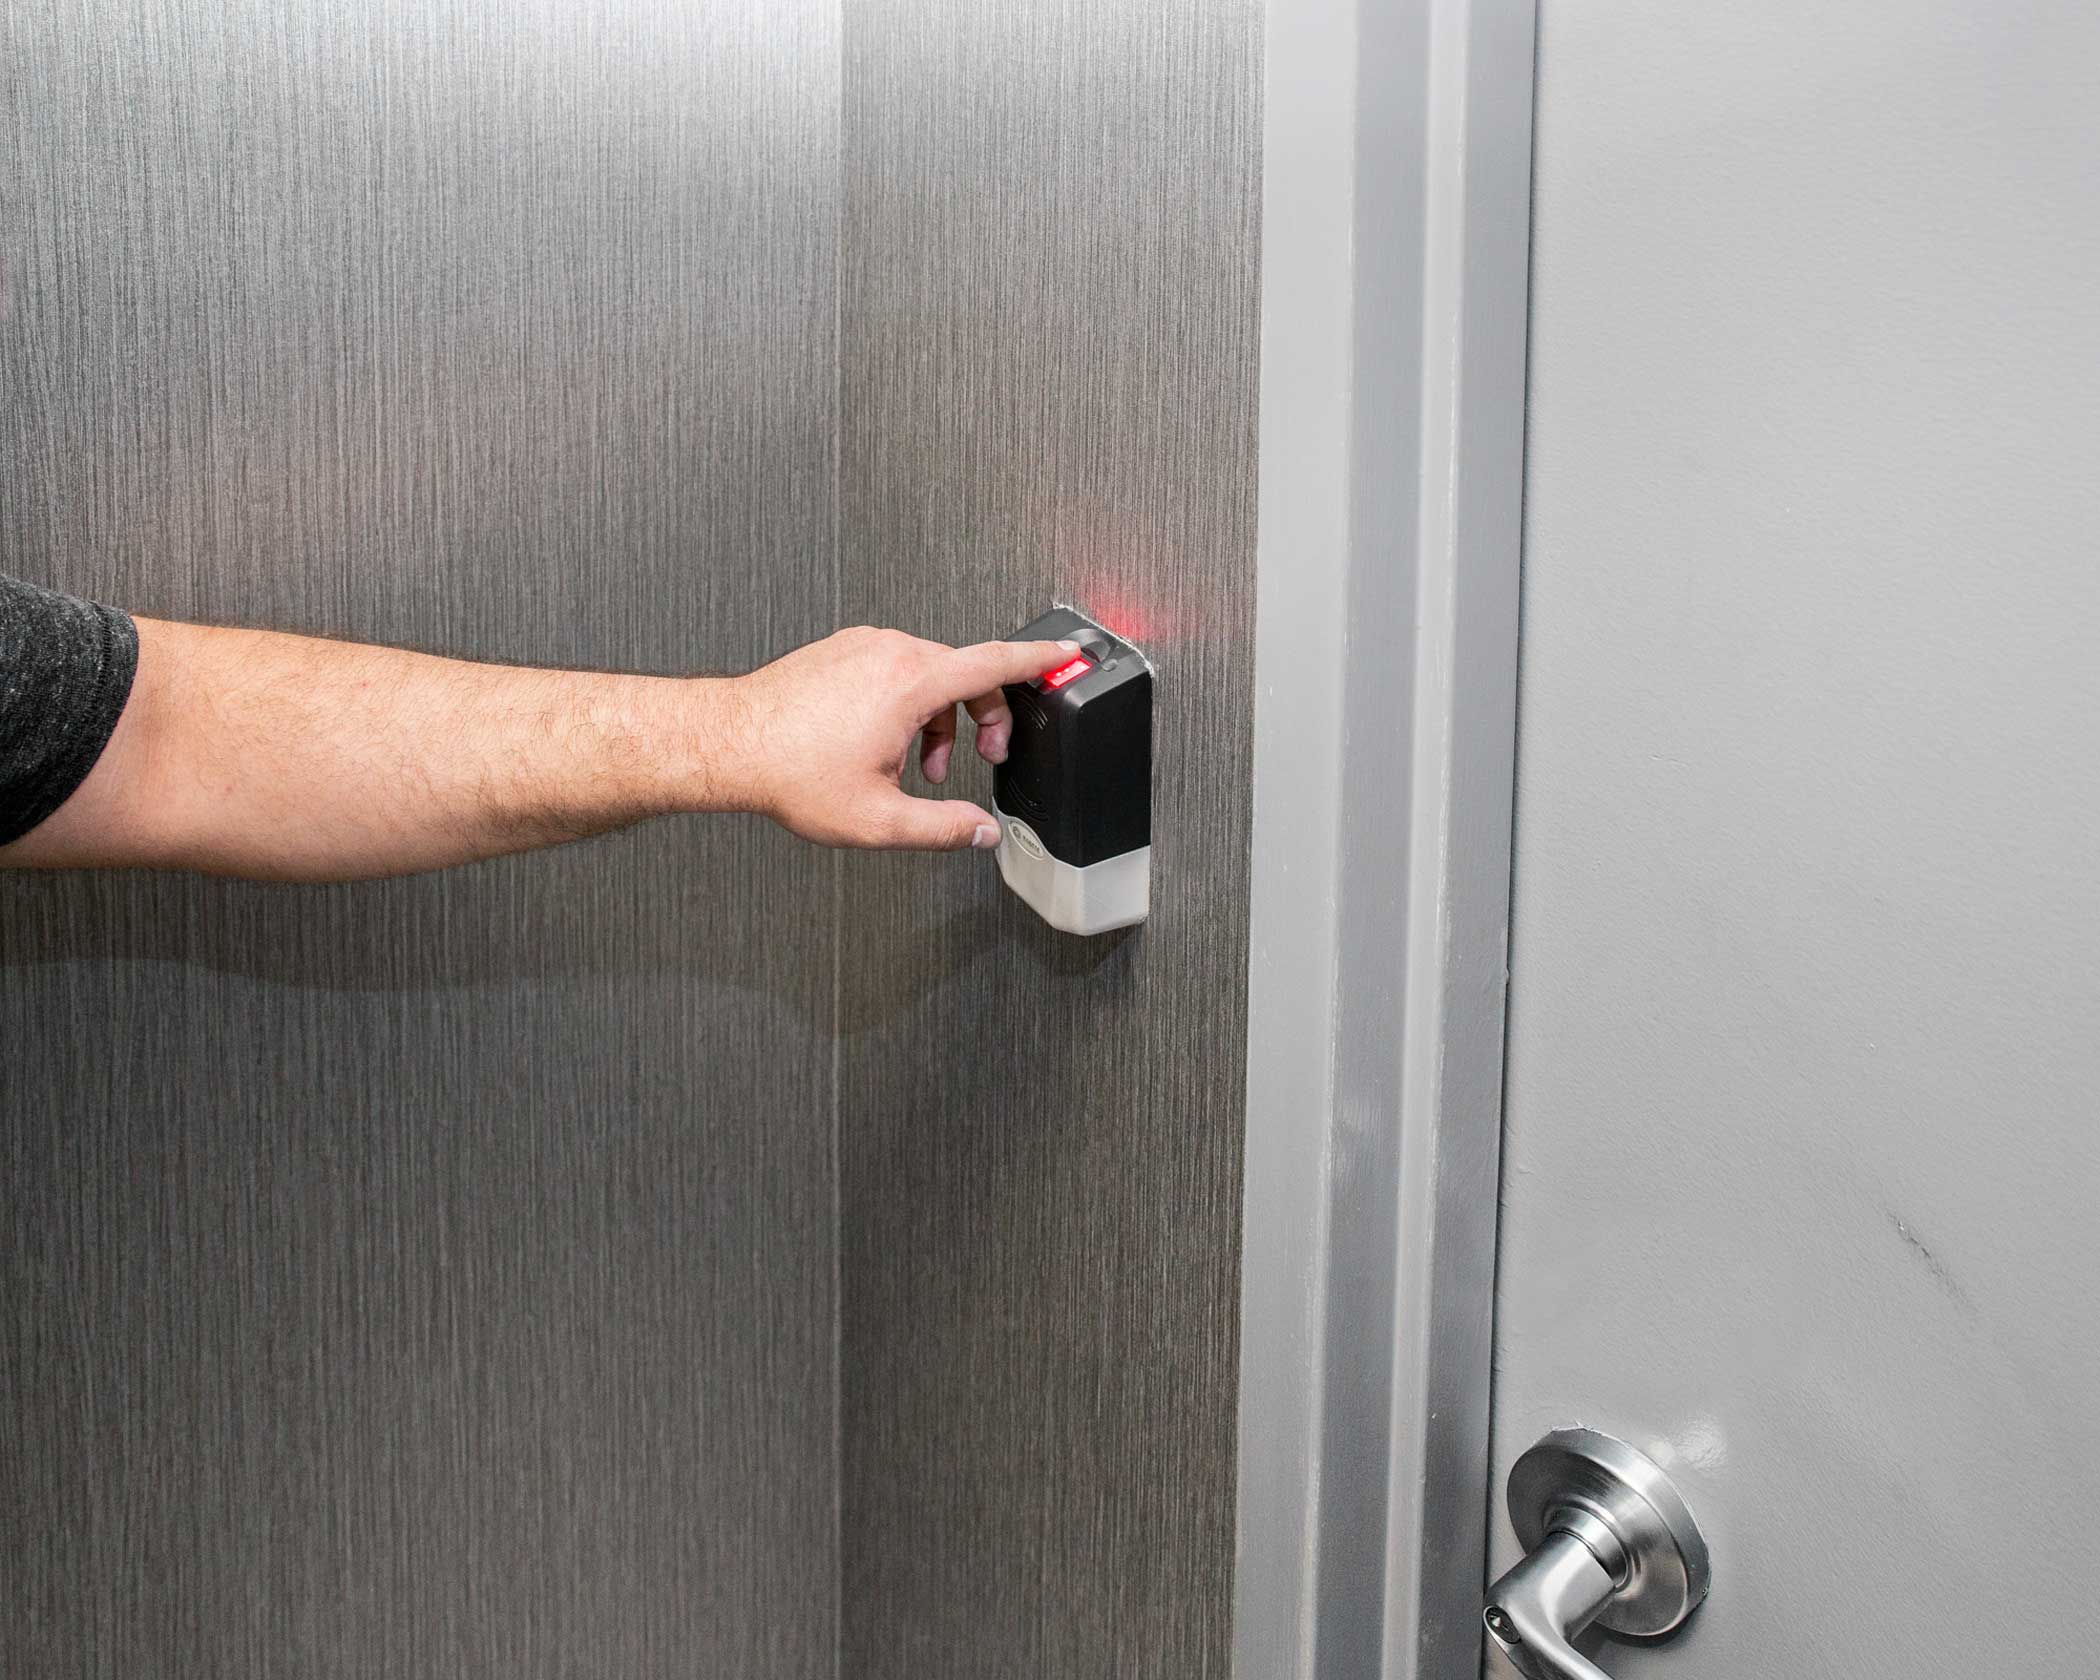 Biometric scanners within double locking doors ("mantraps") are common protections when entering a facility or moving between floors.